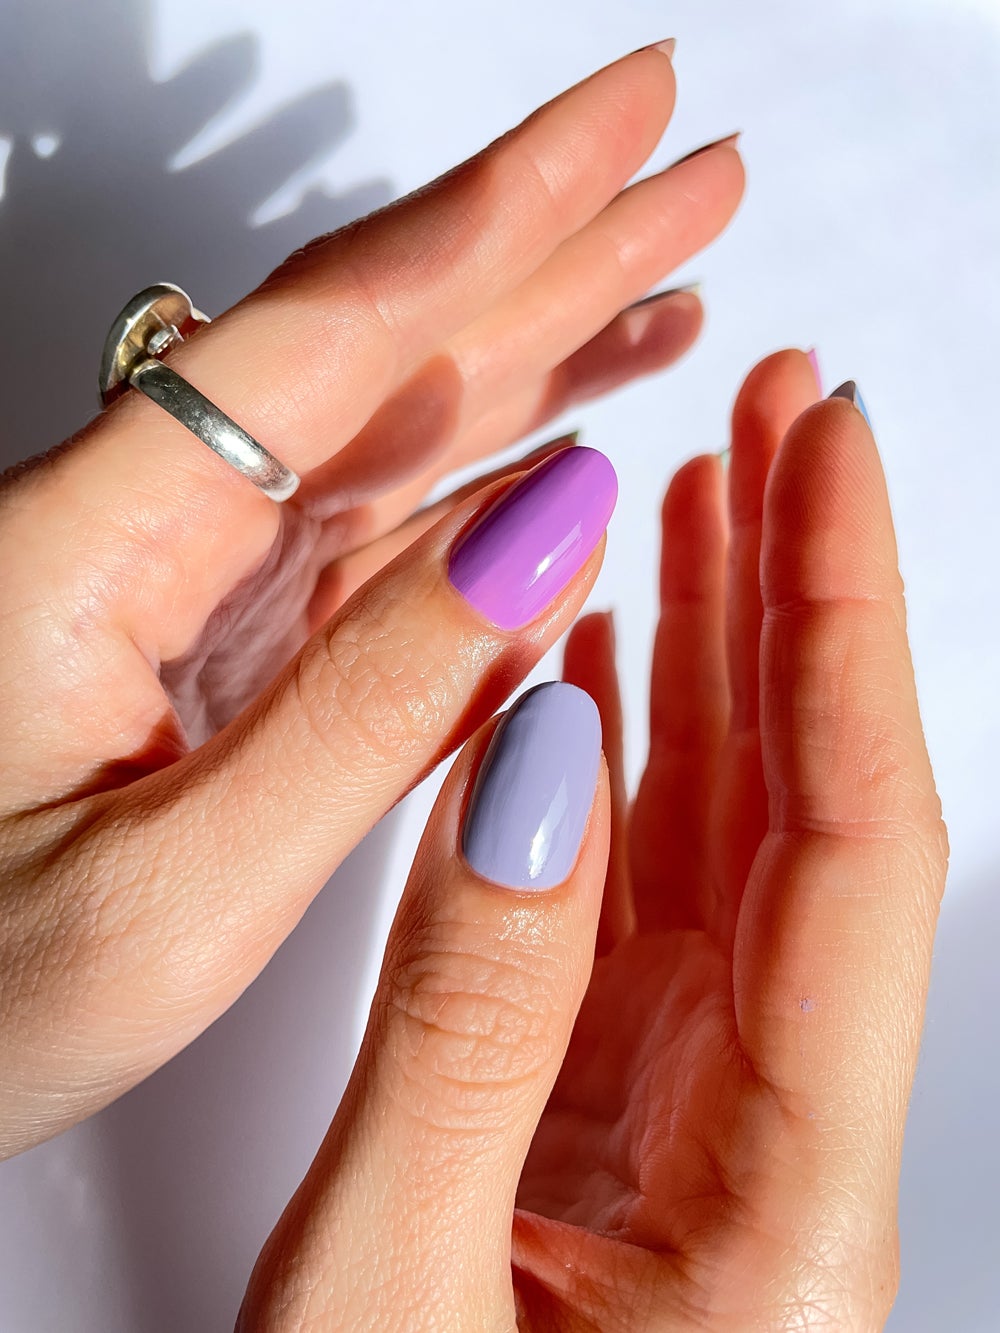 7 Fall 2022 Nail Polish Color Trends To Look Out For